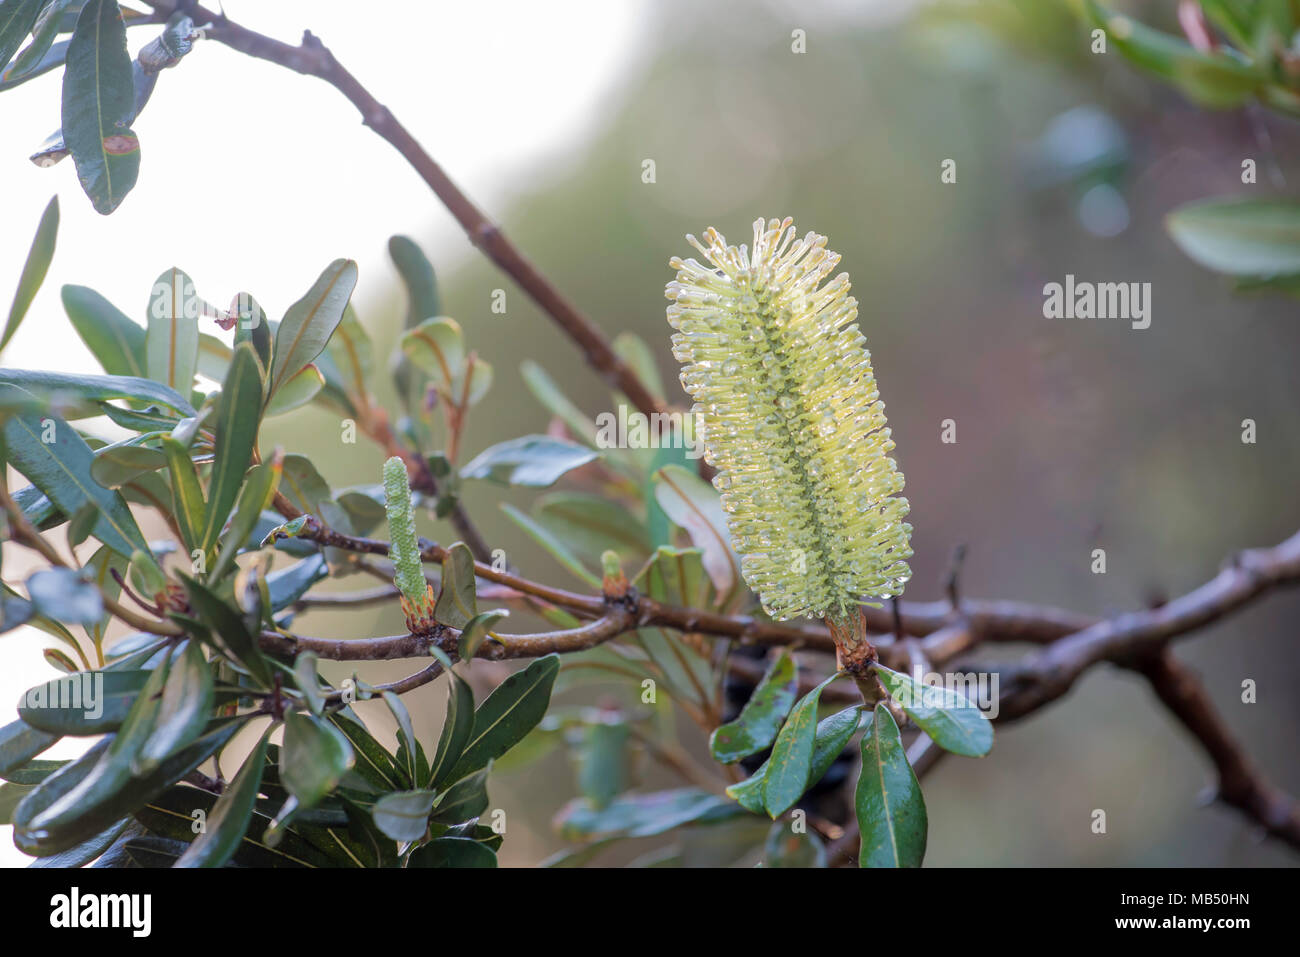 Banksia integrifolia known as Coast Banksia is a native Australian tree  that is common in parks and near beaches on the east coast of Australia  Stock Photo - Alamy